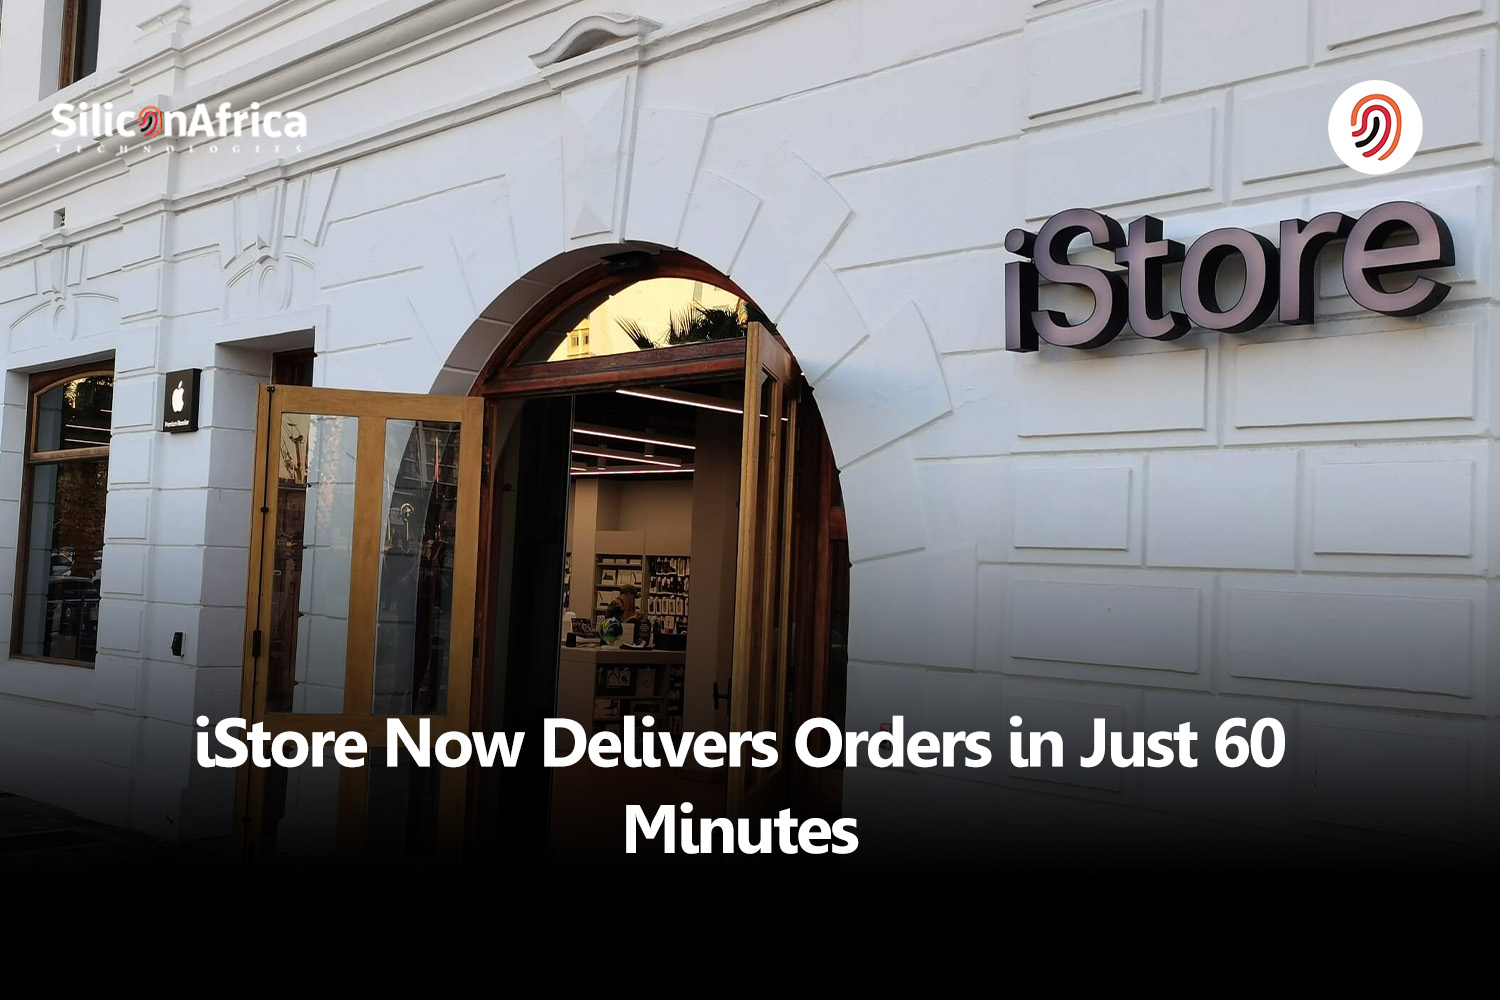 iStore 60-minute deliveries